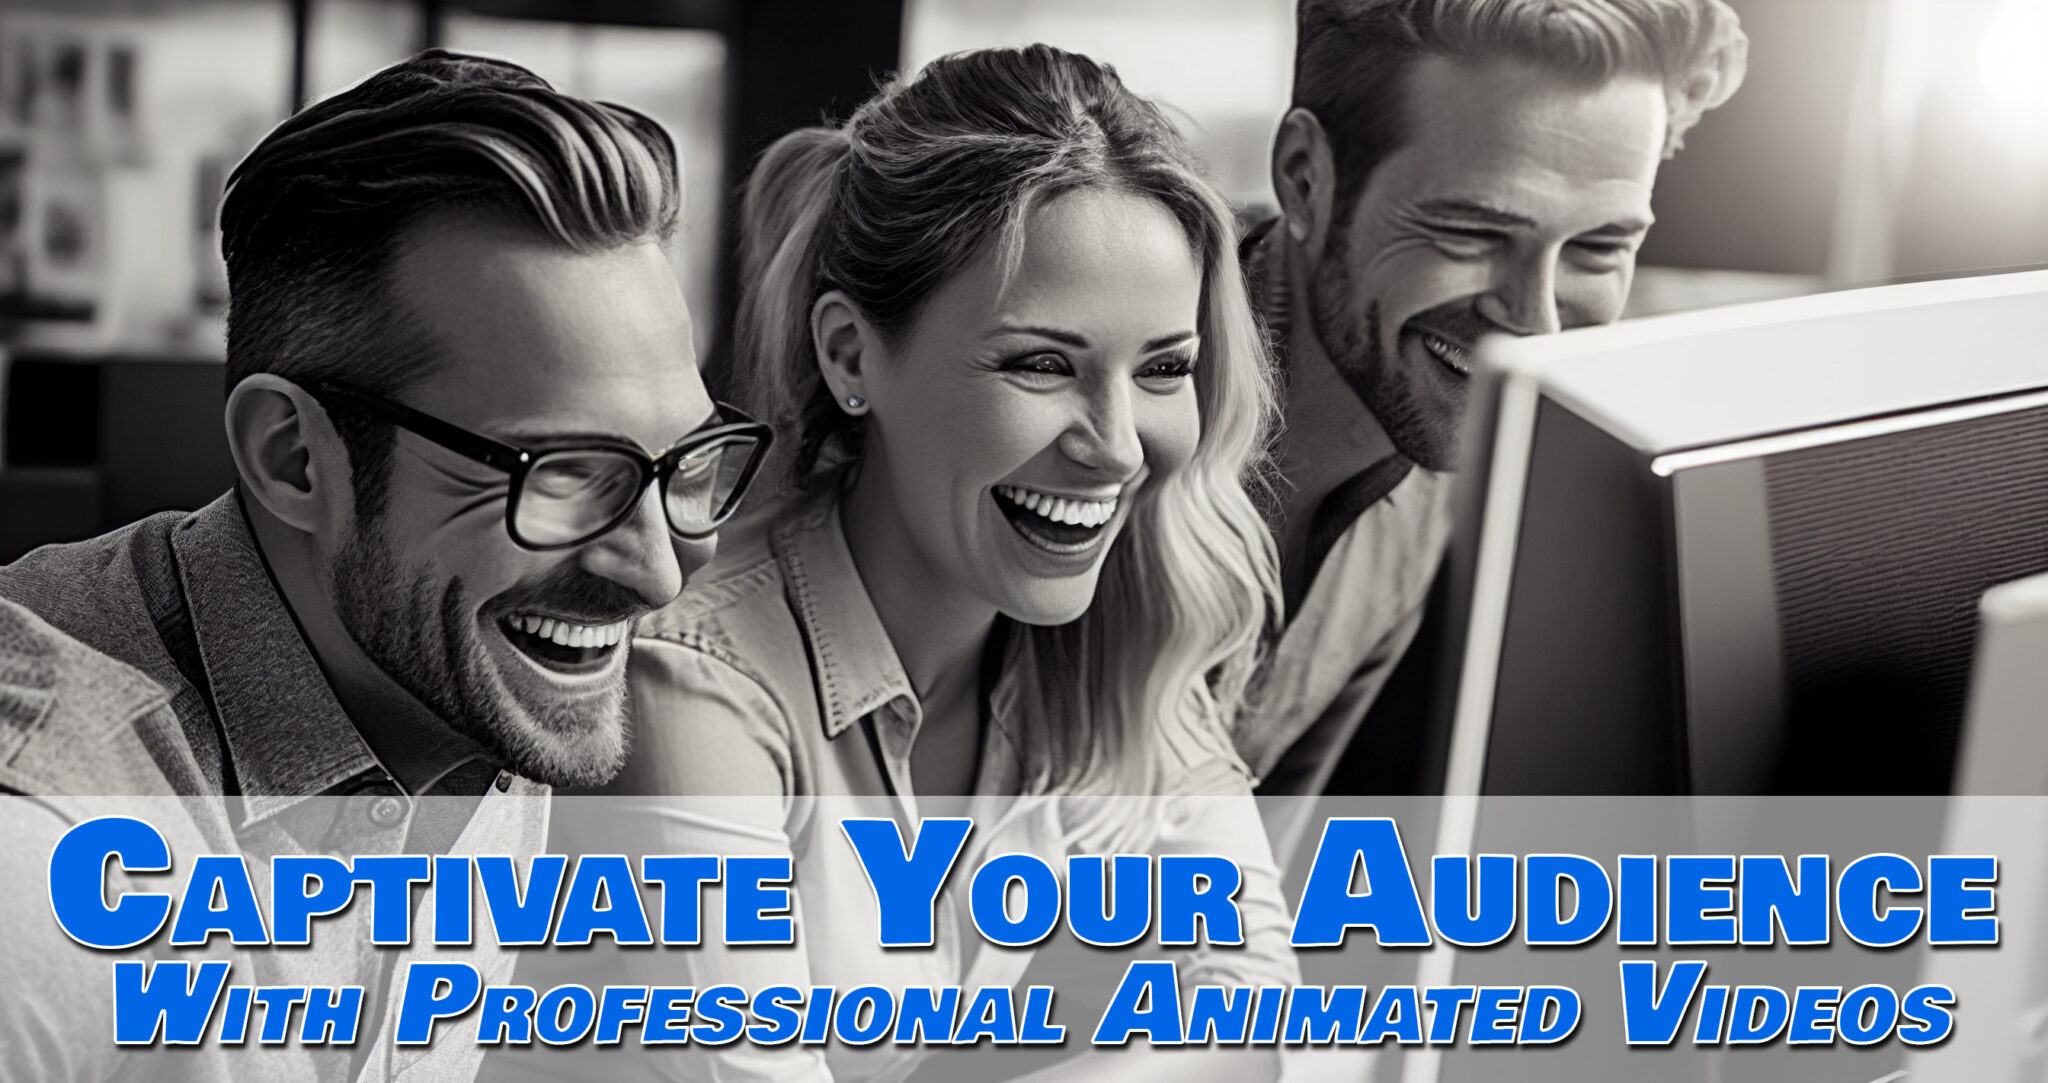 Captivate your audience with professional animated videos